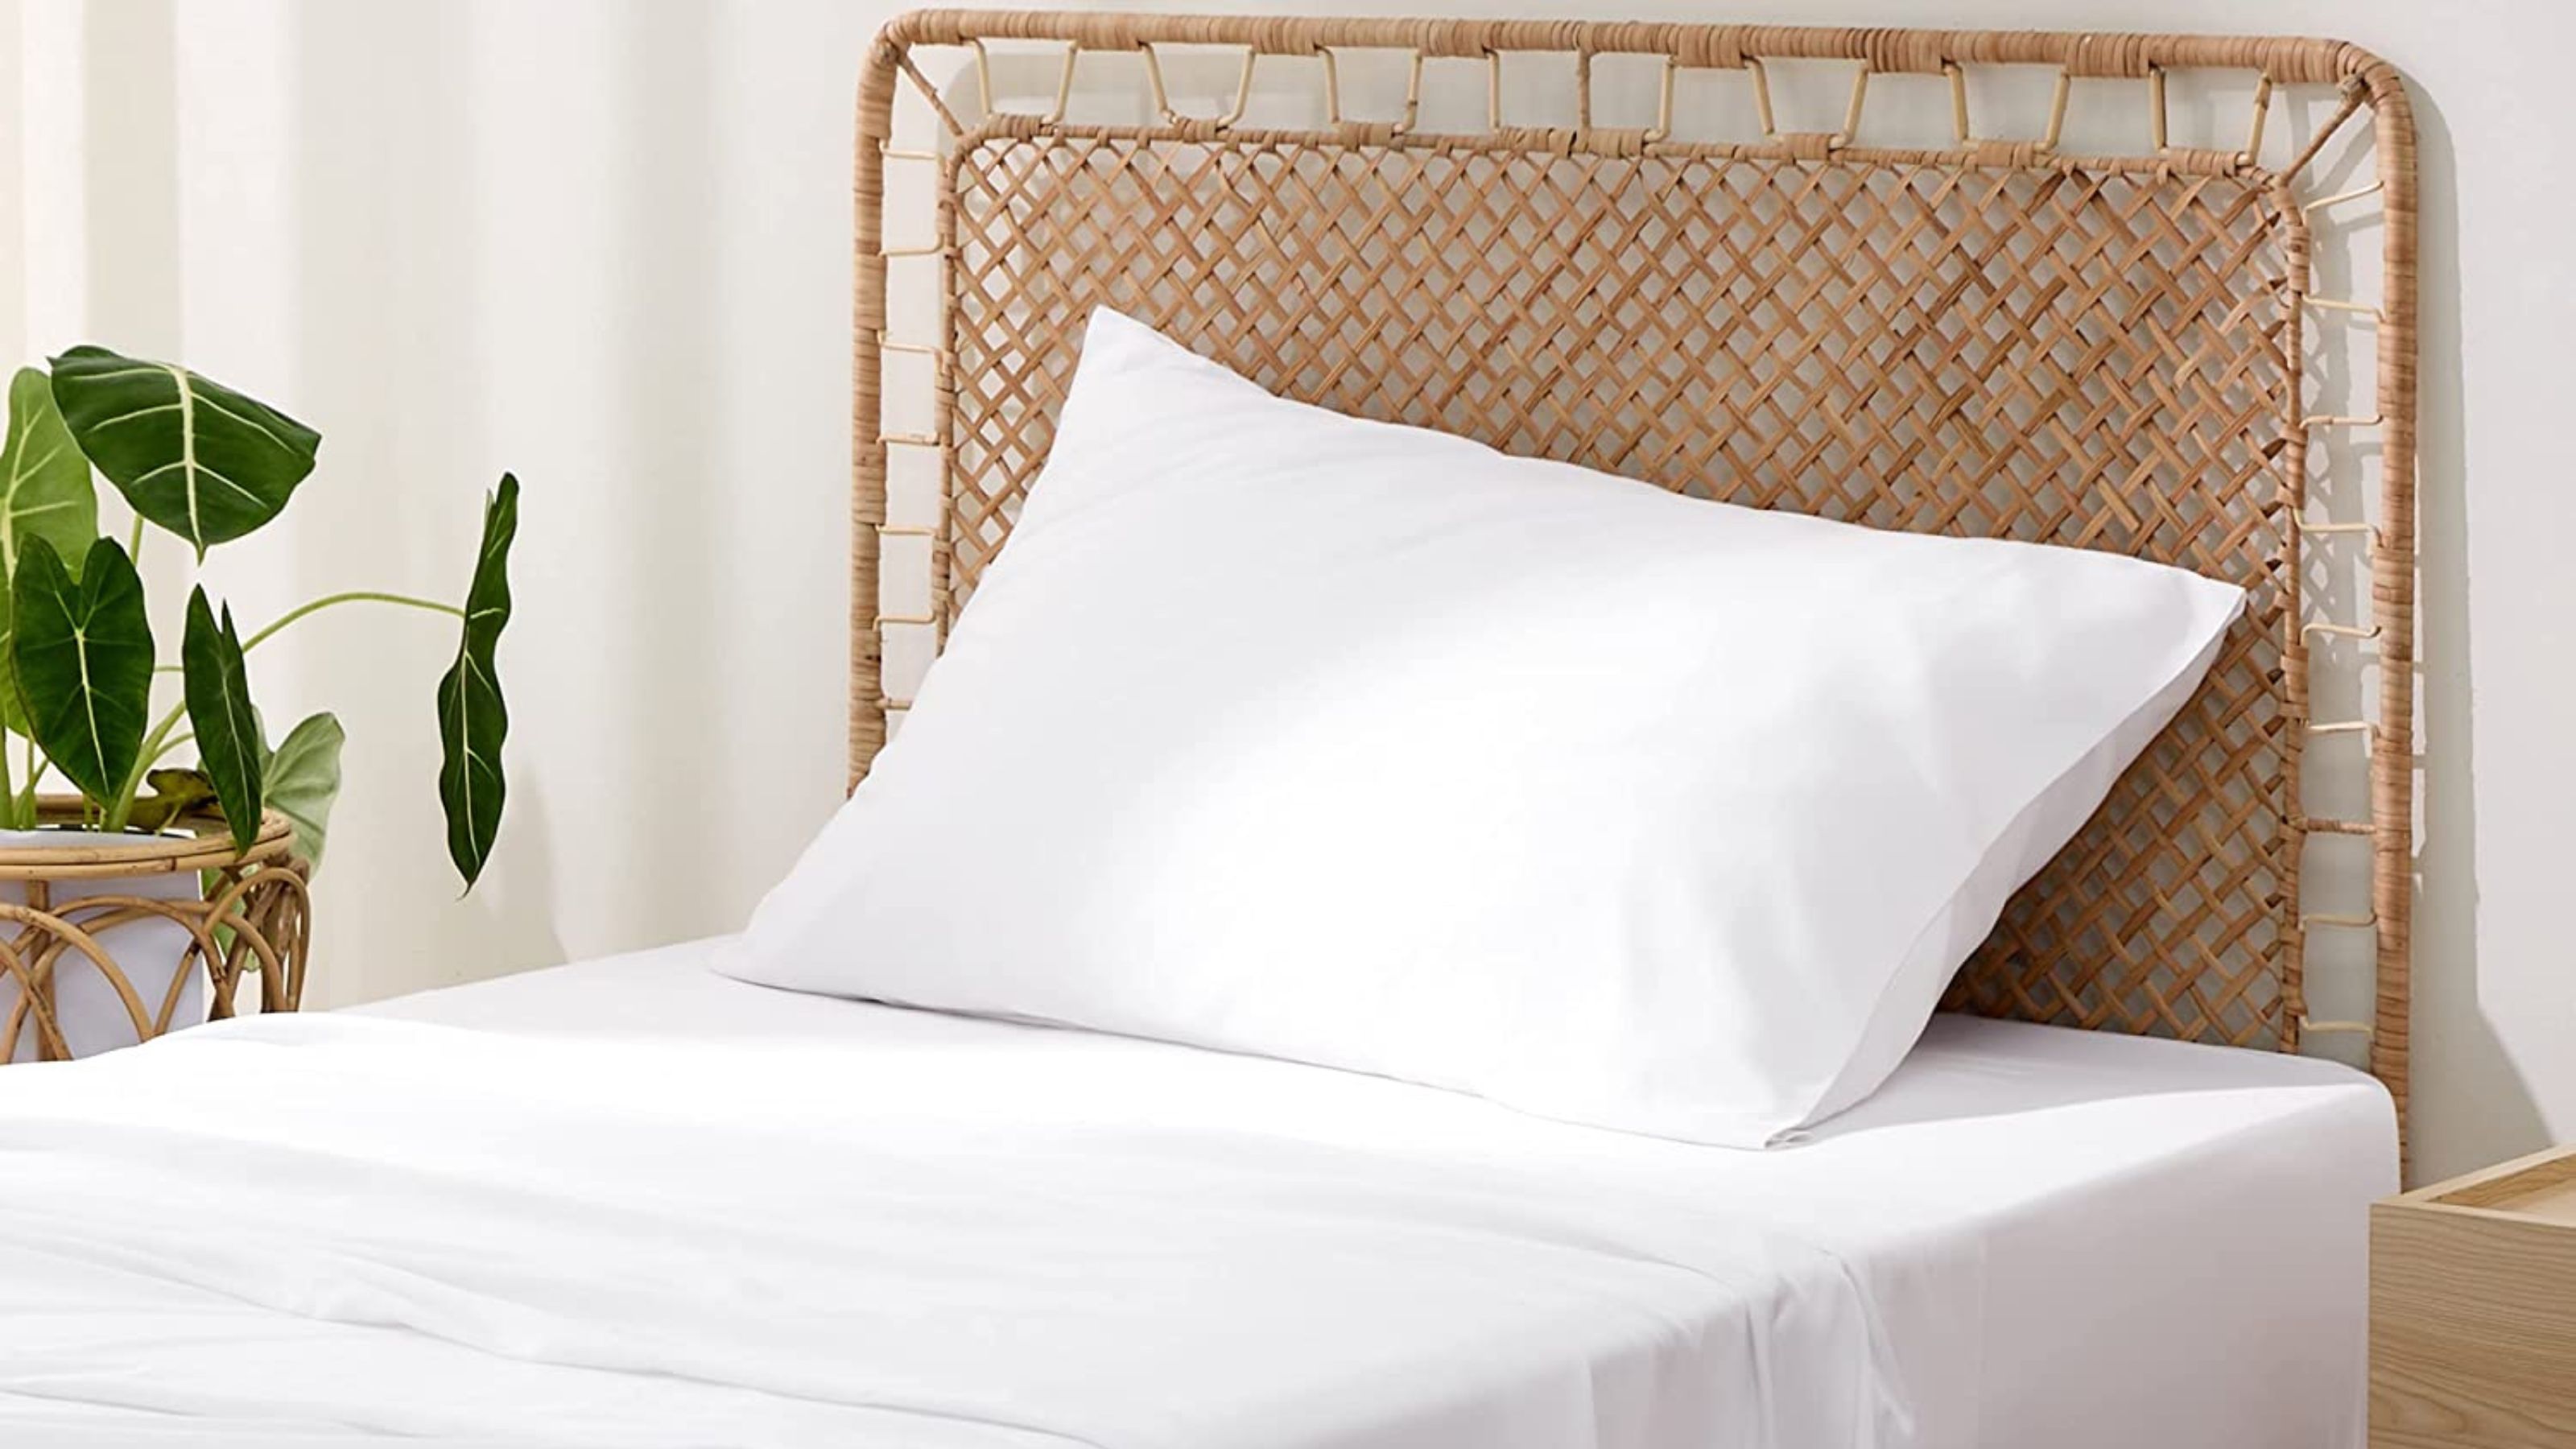 The Bedsure Bamboo Cooling Bed Sheets Are on Sale at